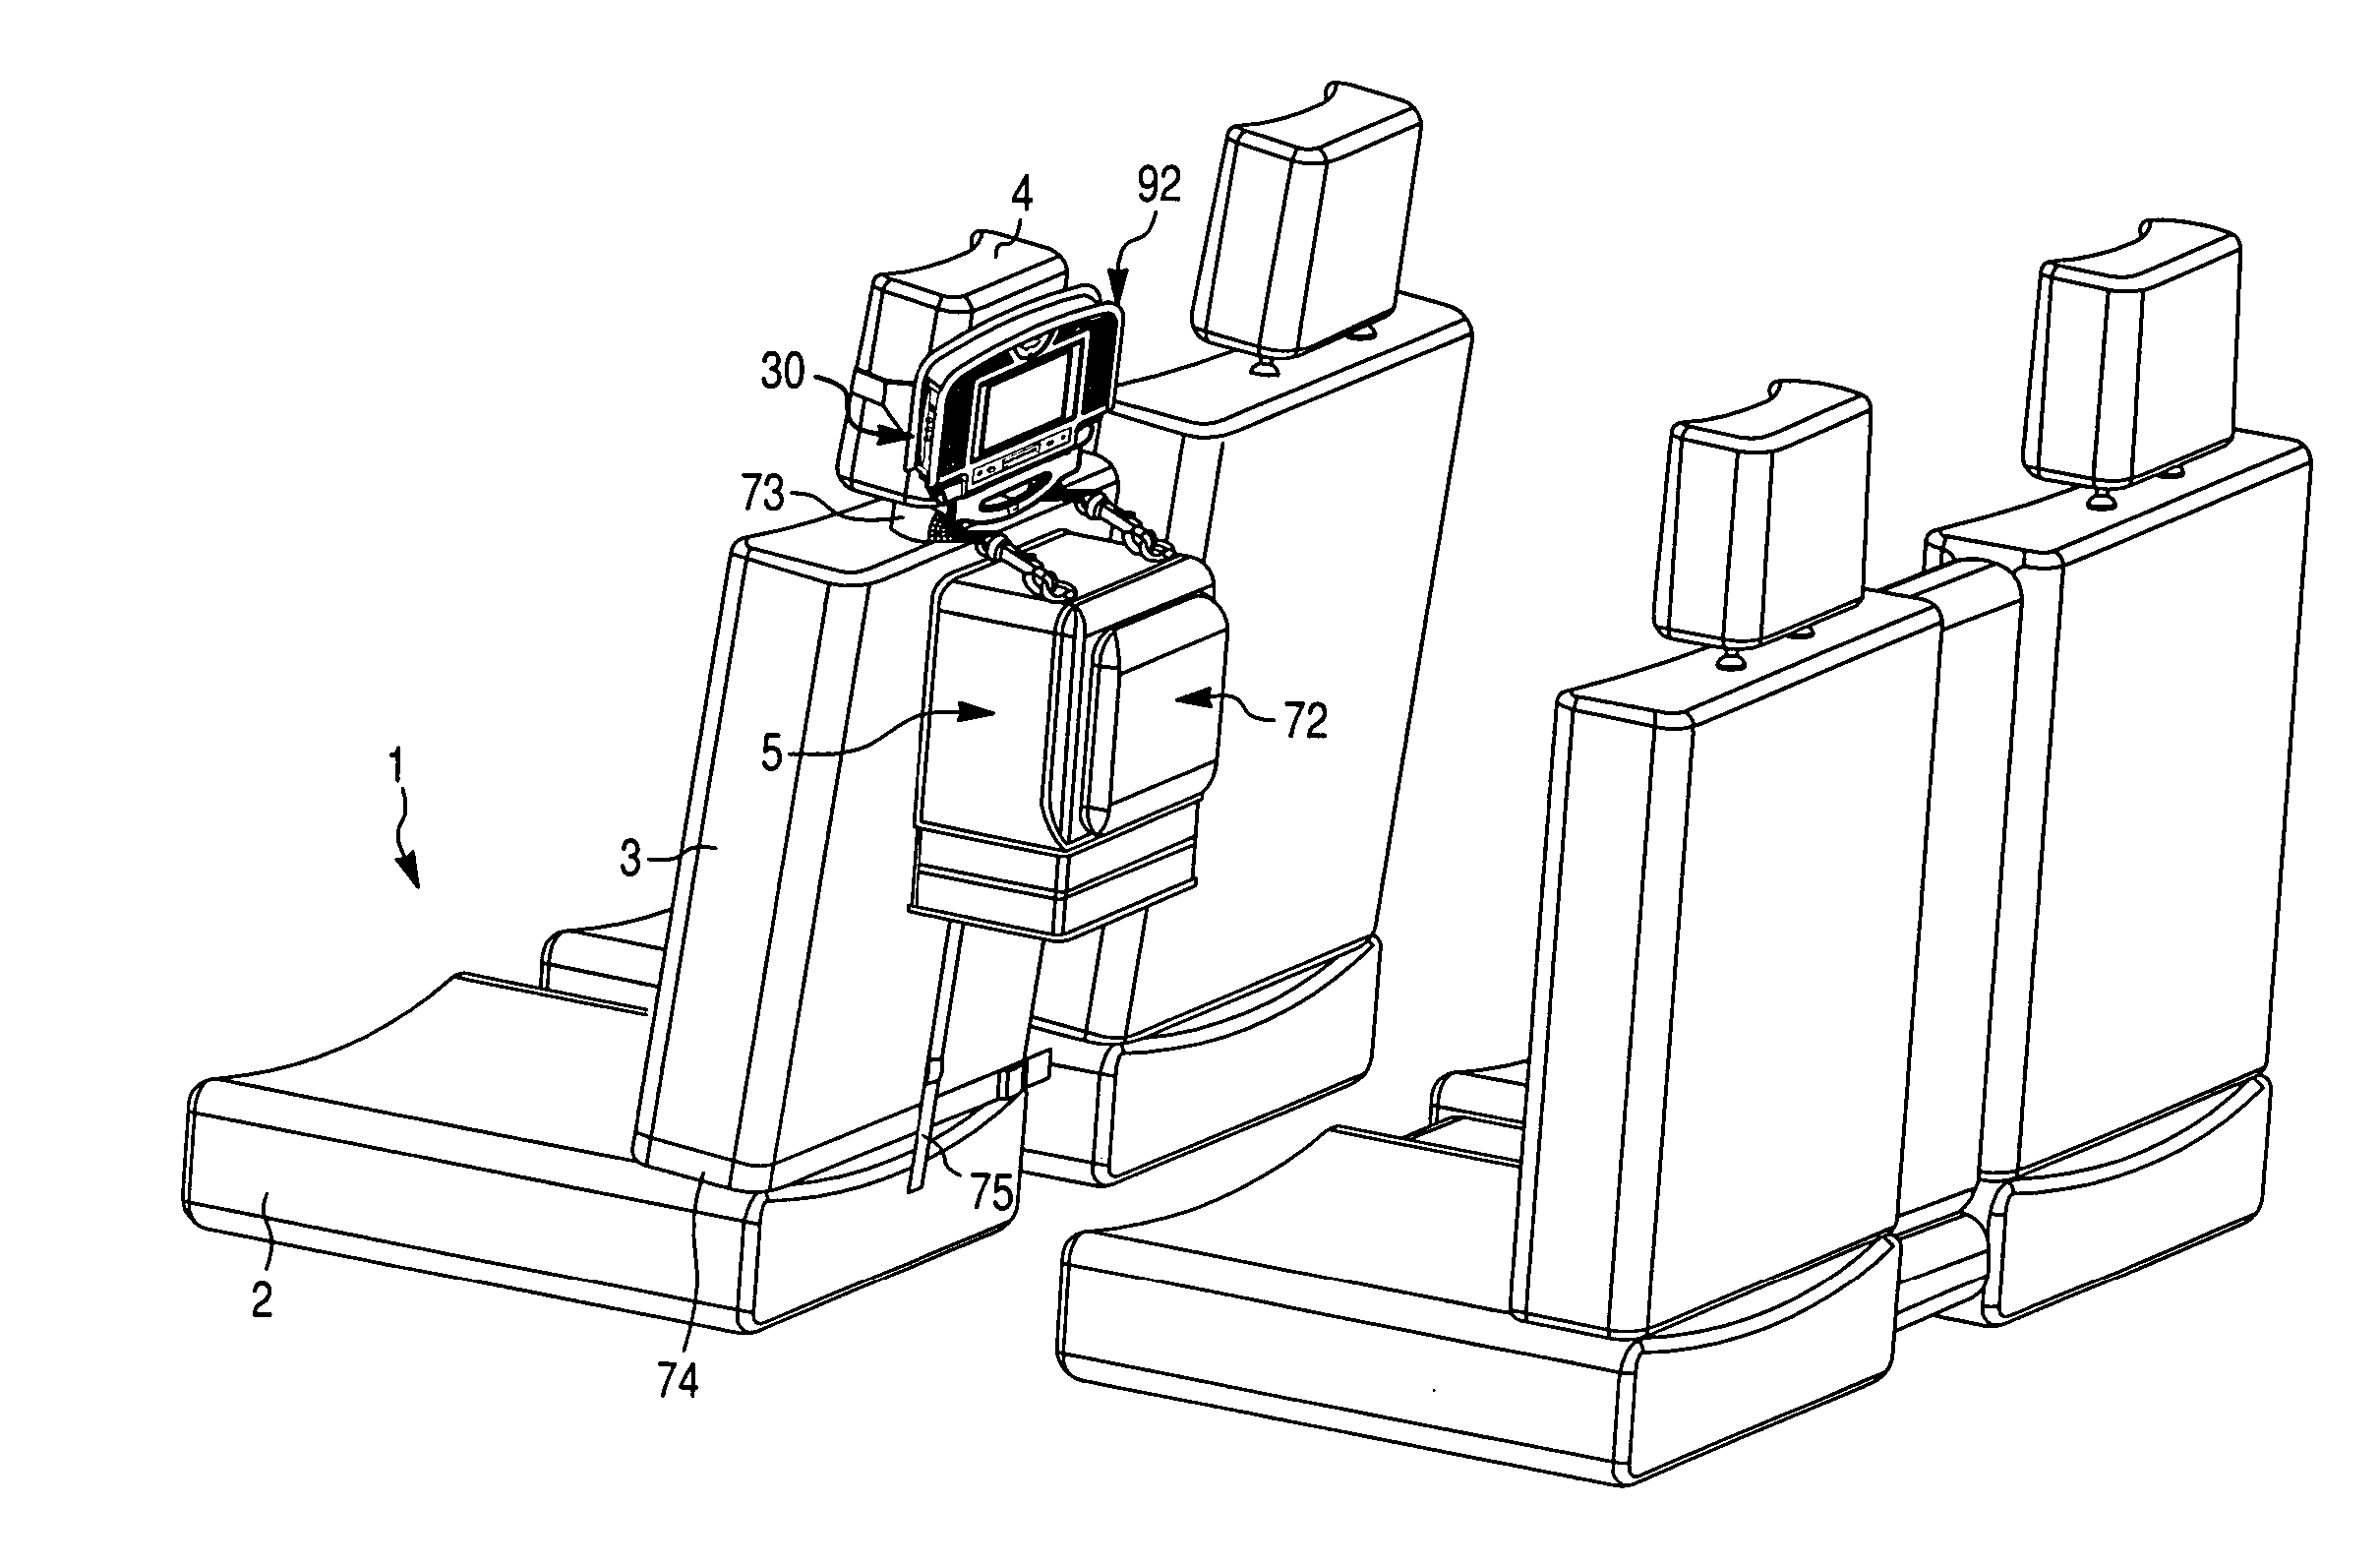 Mounting kit for releasably securing portable video player device and/or detachable display unit to vehicle seat